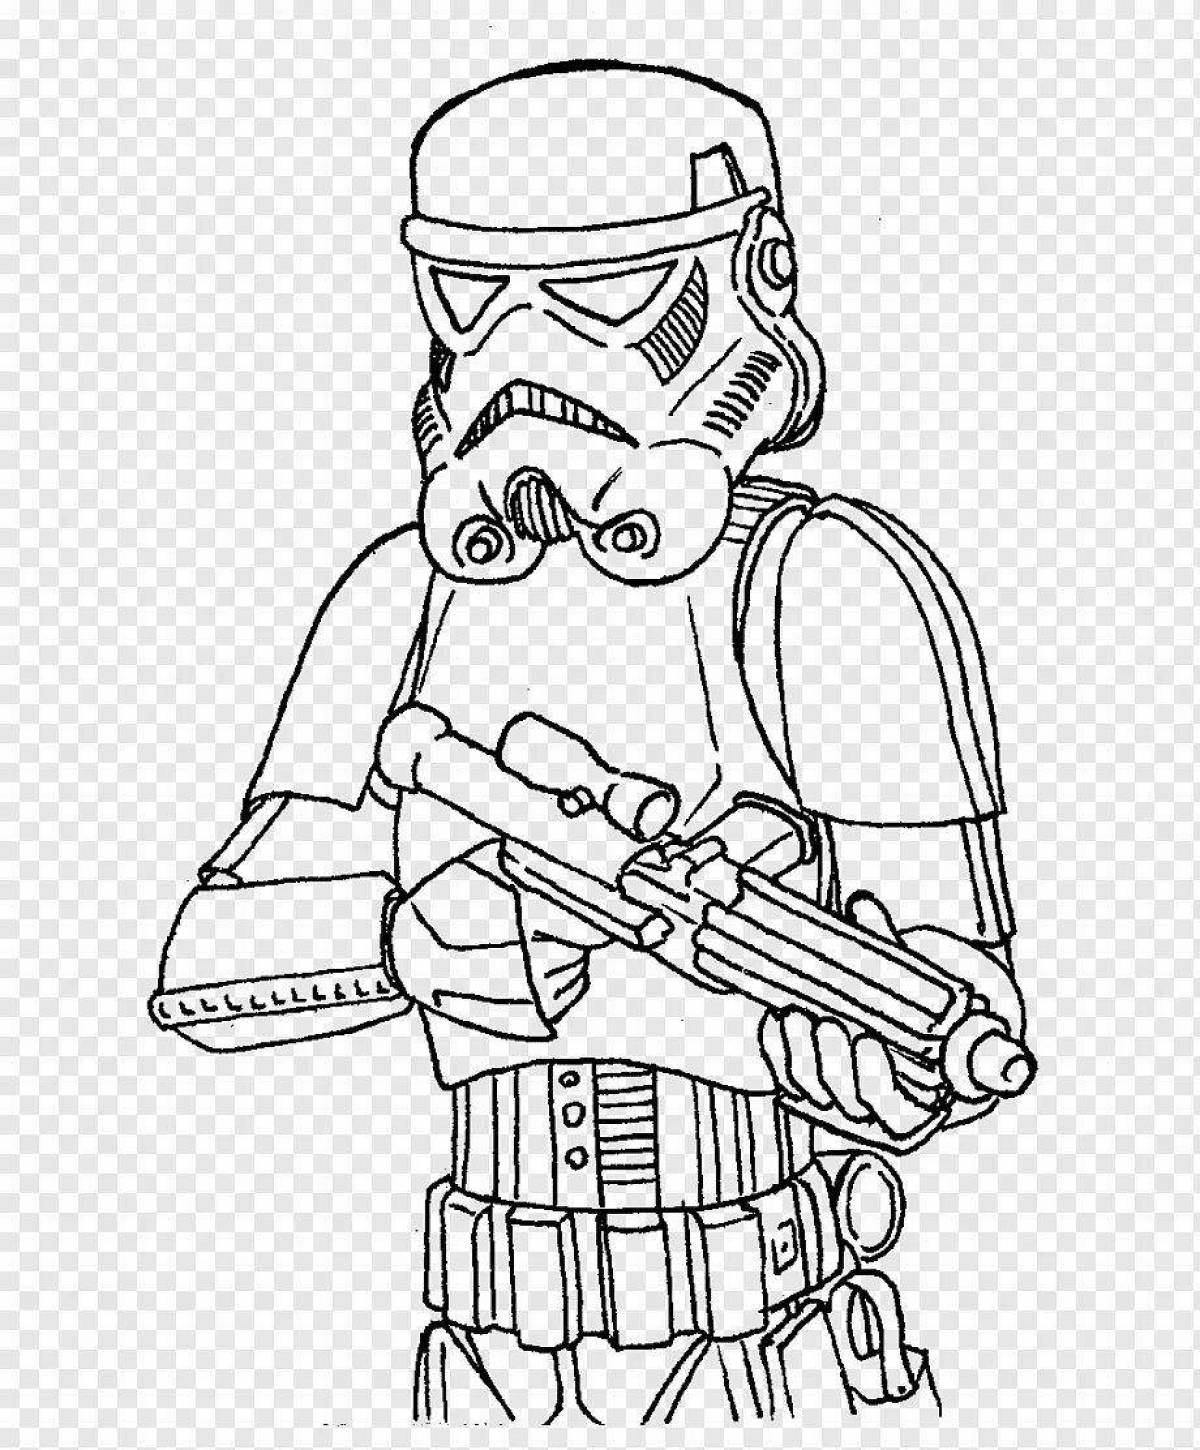 Star wars stormtrooper iconic coloring page